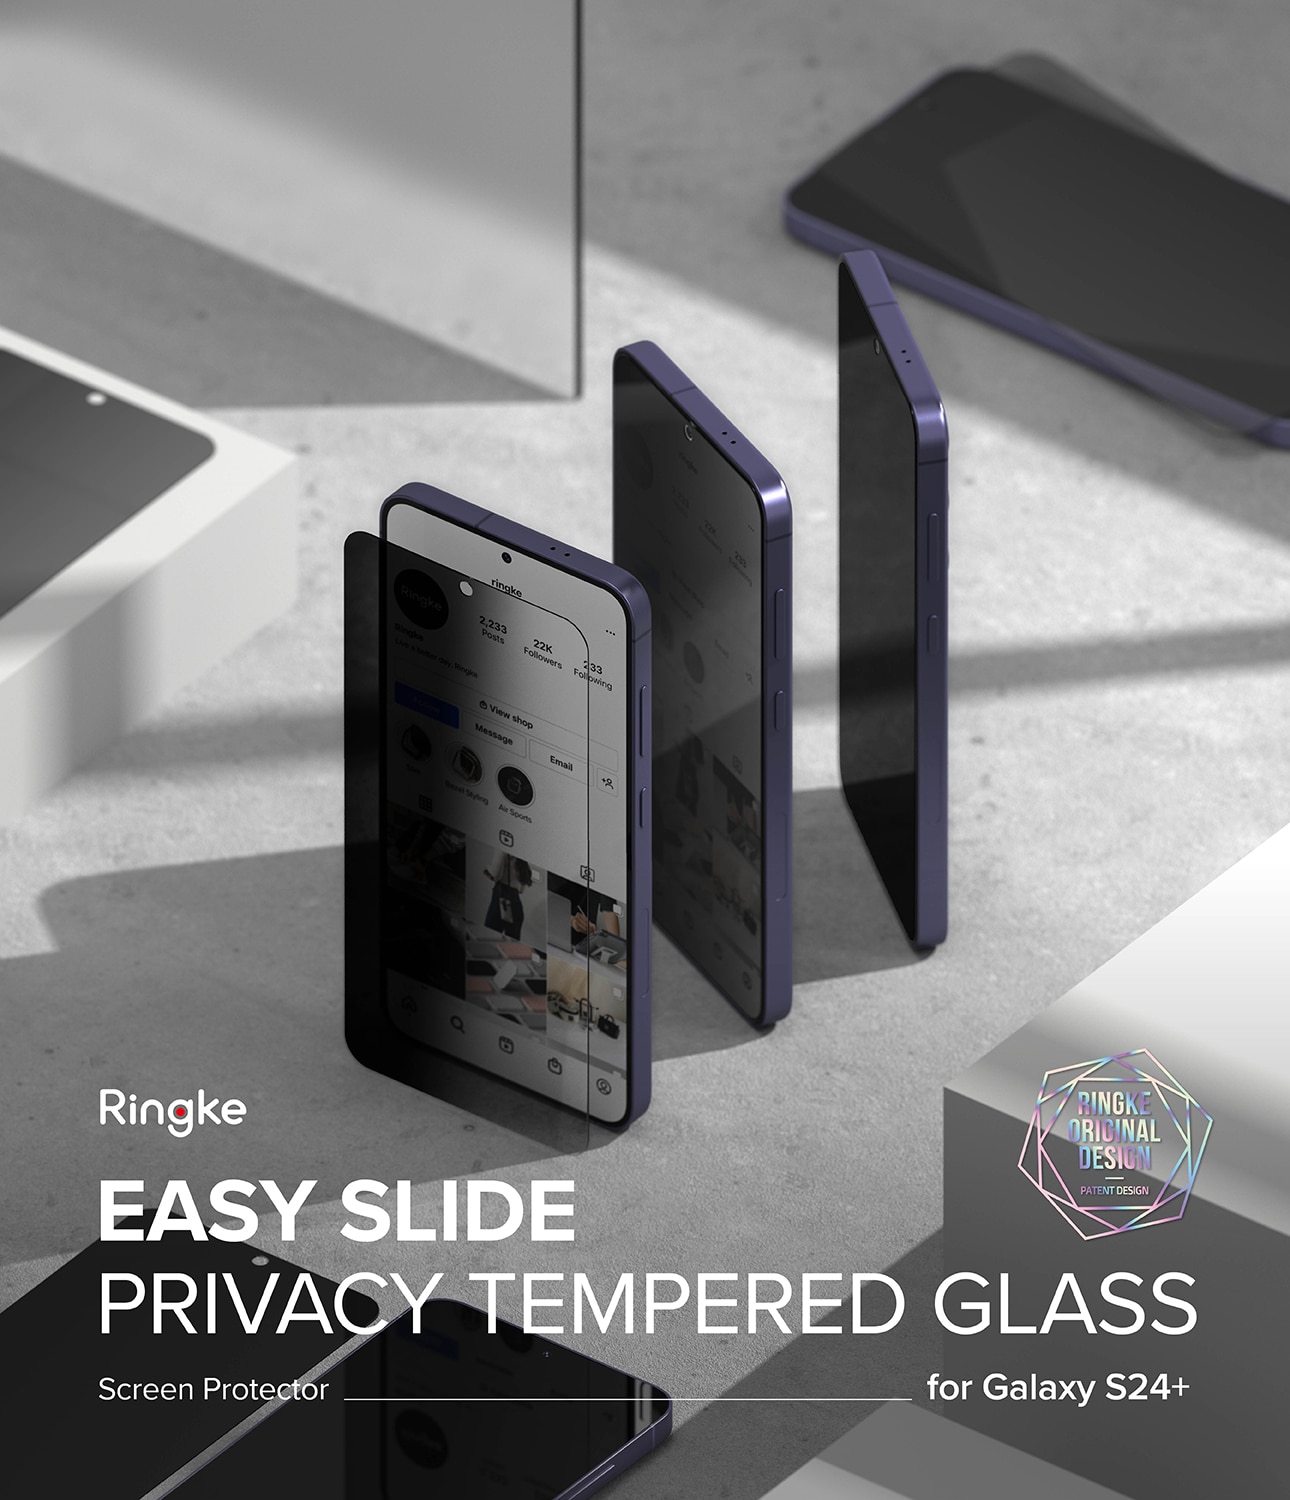 Samsung Galaxy S24 Easy Slide Privacy Glass (2-pack)